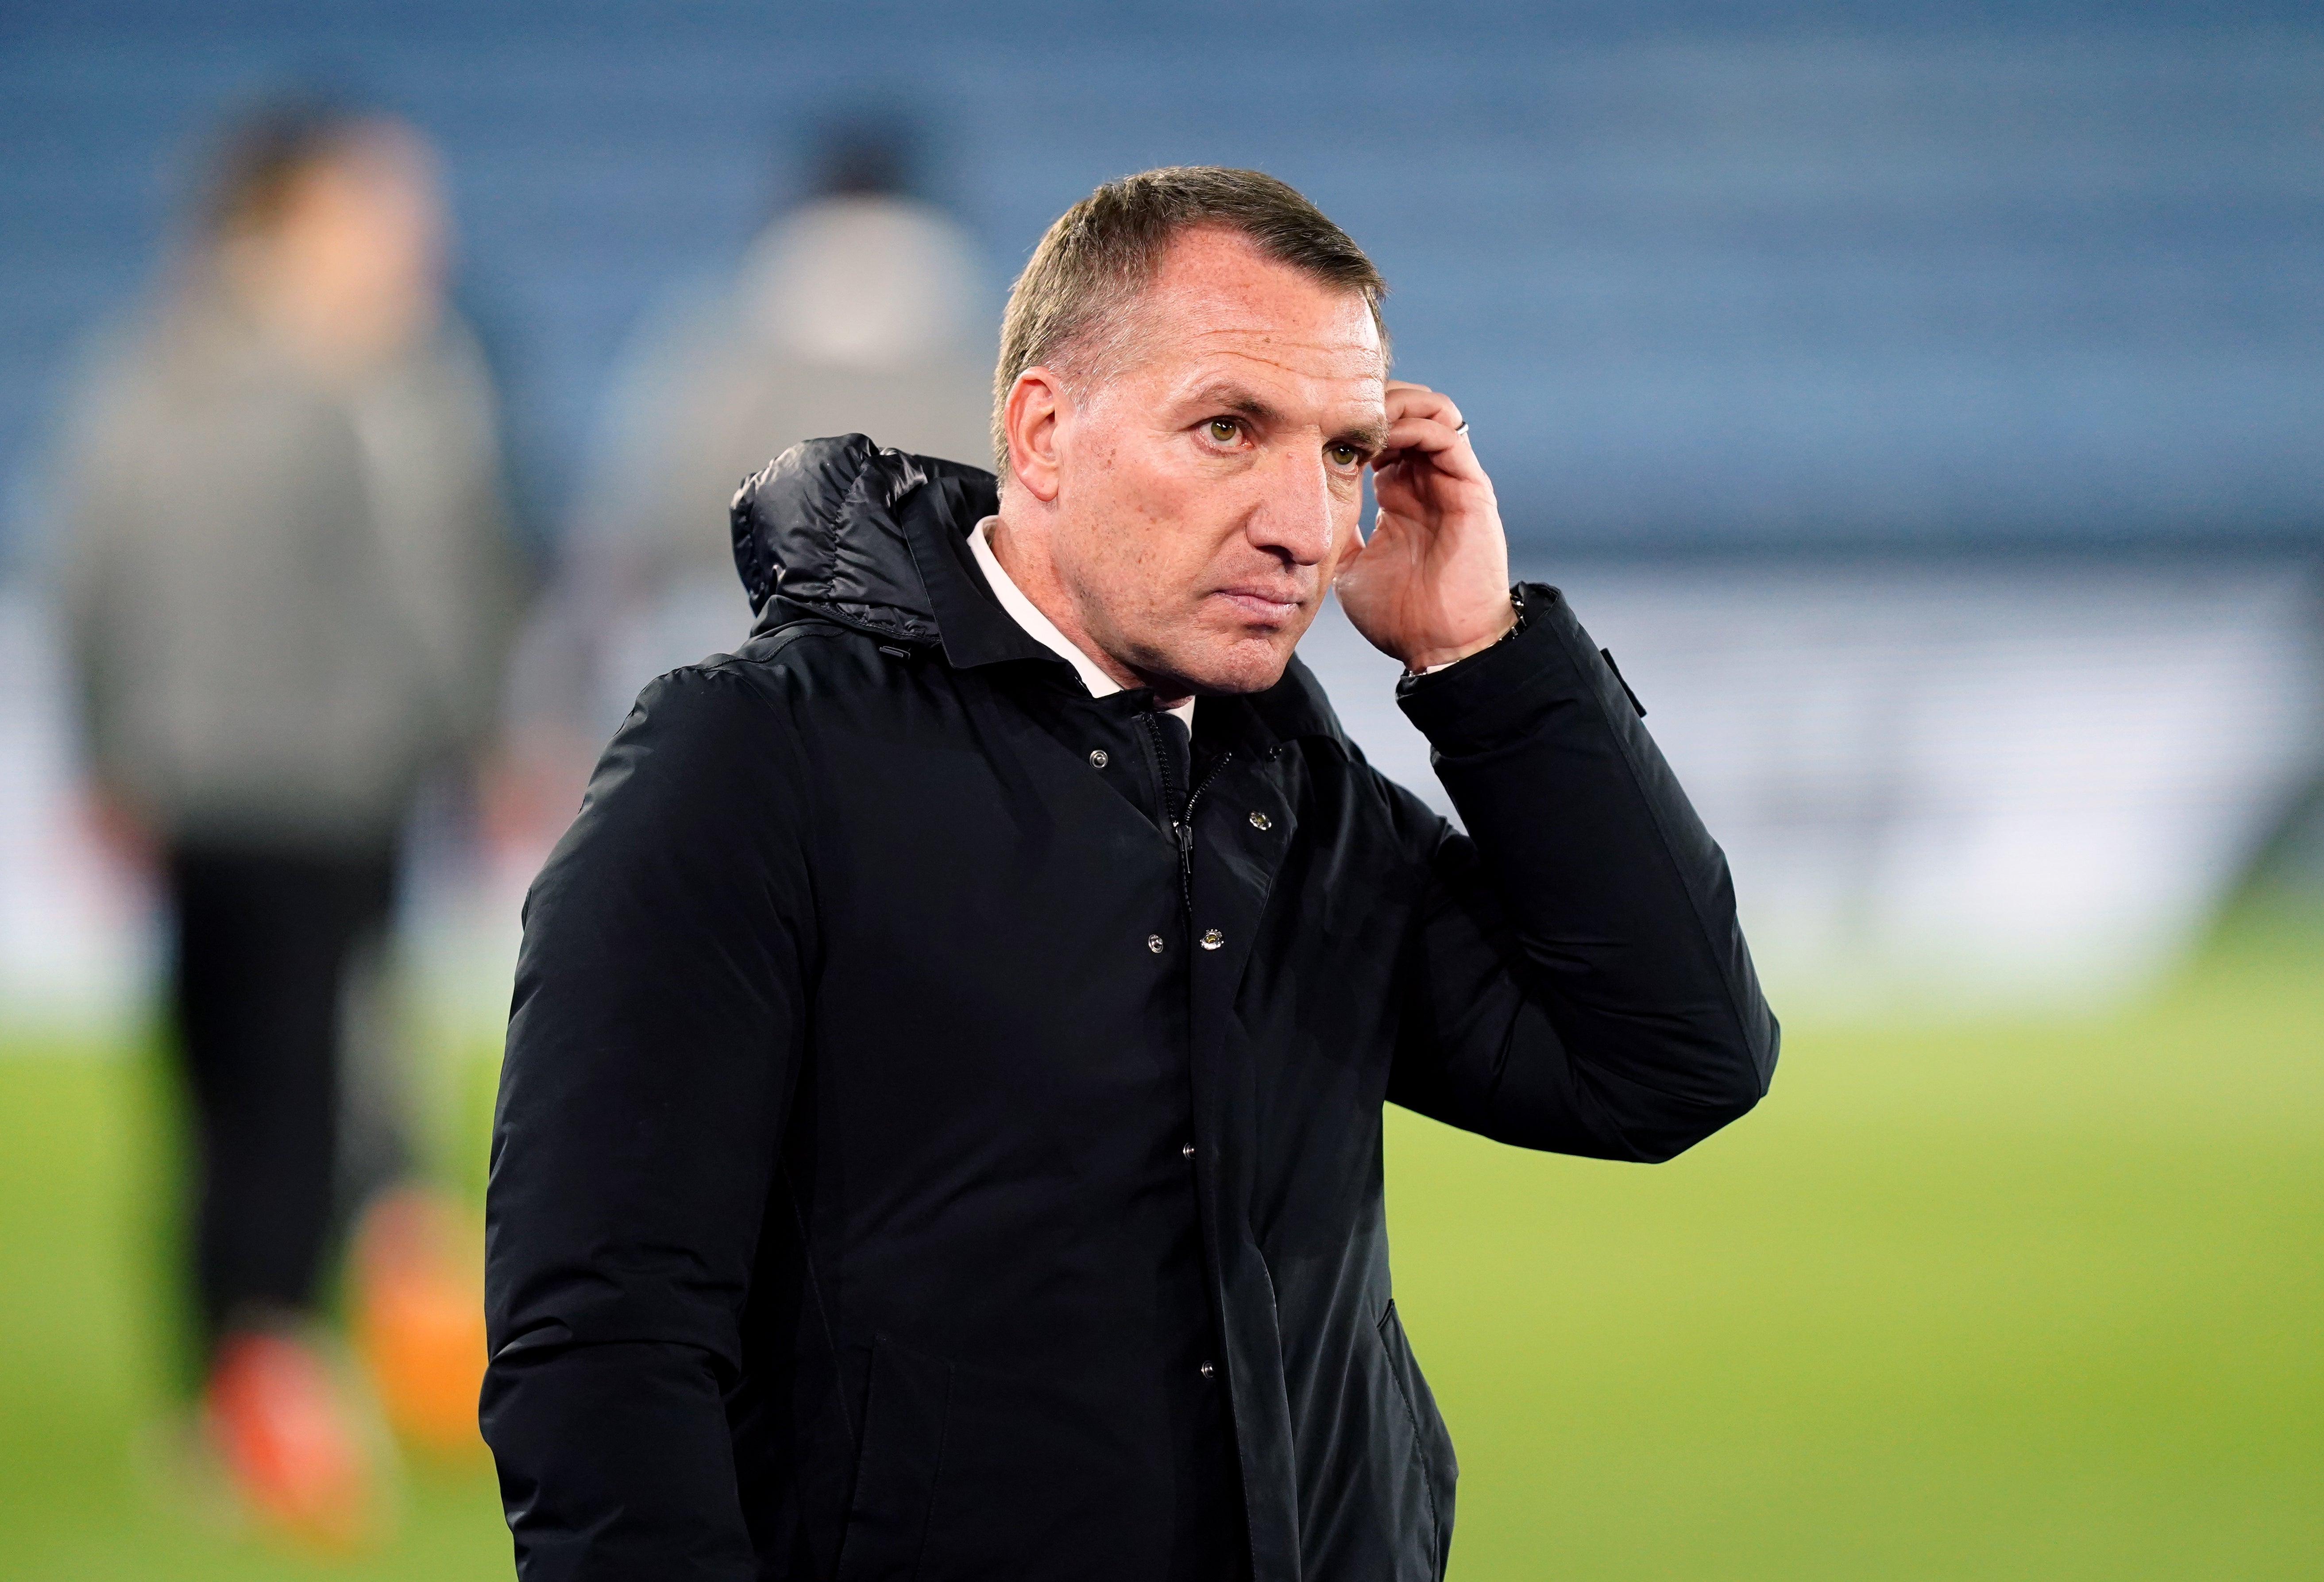 Leicester manager Brendan Rodgers admitted he’s struggled in this transfer window (Mike Egerton/PA)